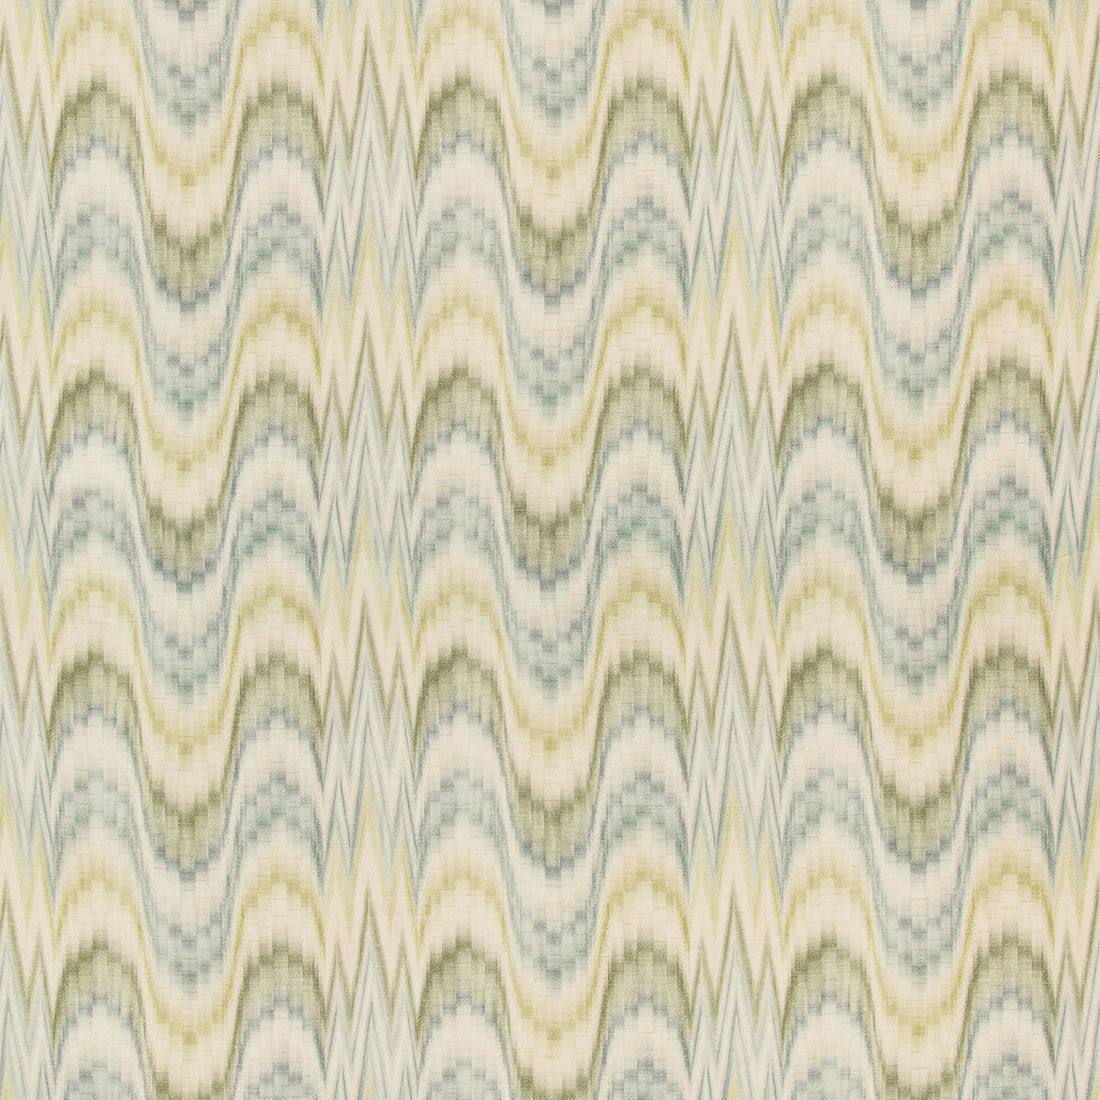 Jasper Print fabric in moss/denim color - pattern 2020185.235.0 - by Lee Jofa in the Avondale collection